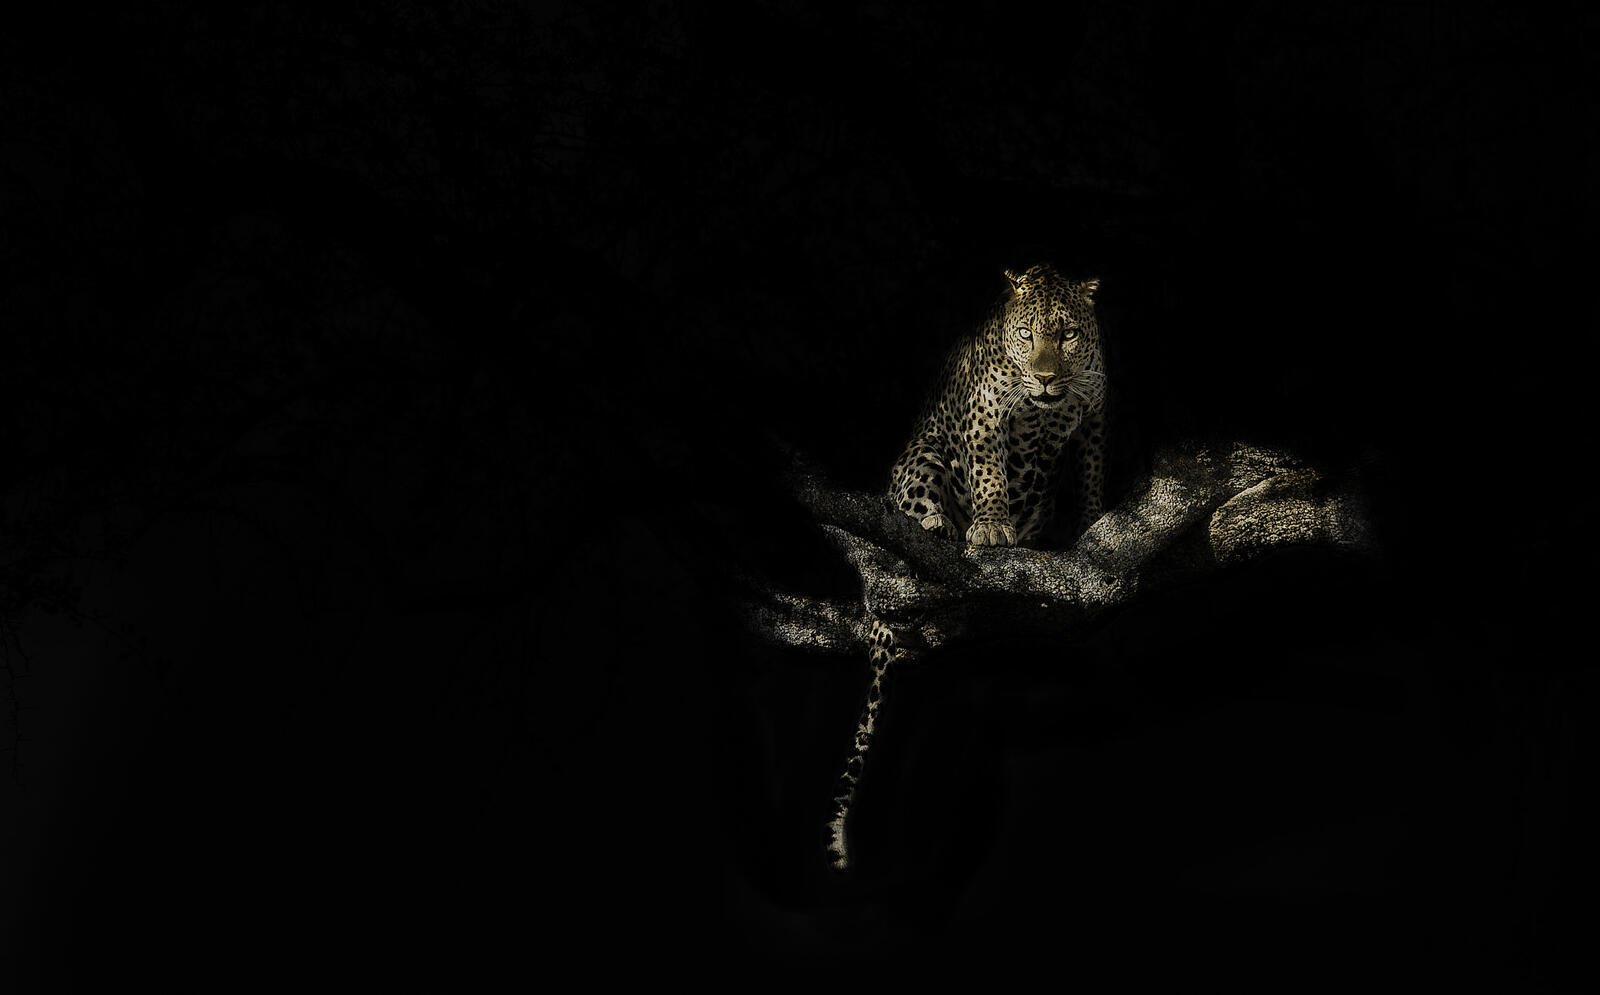 Wallpapers leopard in a tree black background carnivore on the desktop